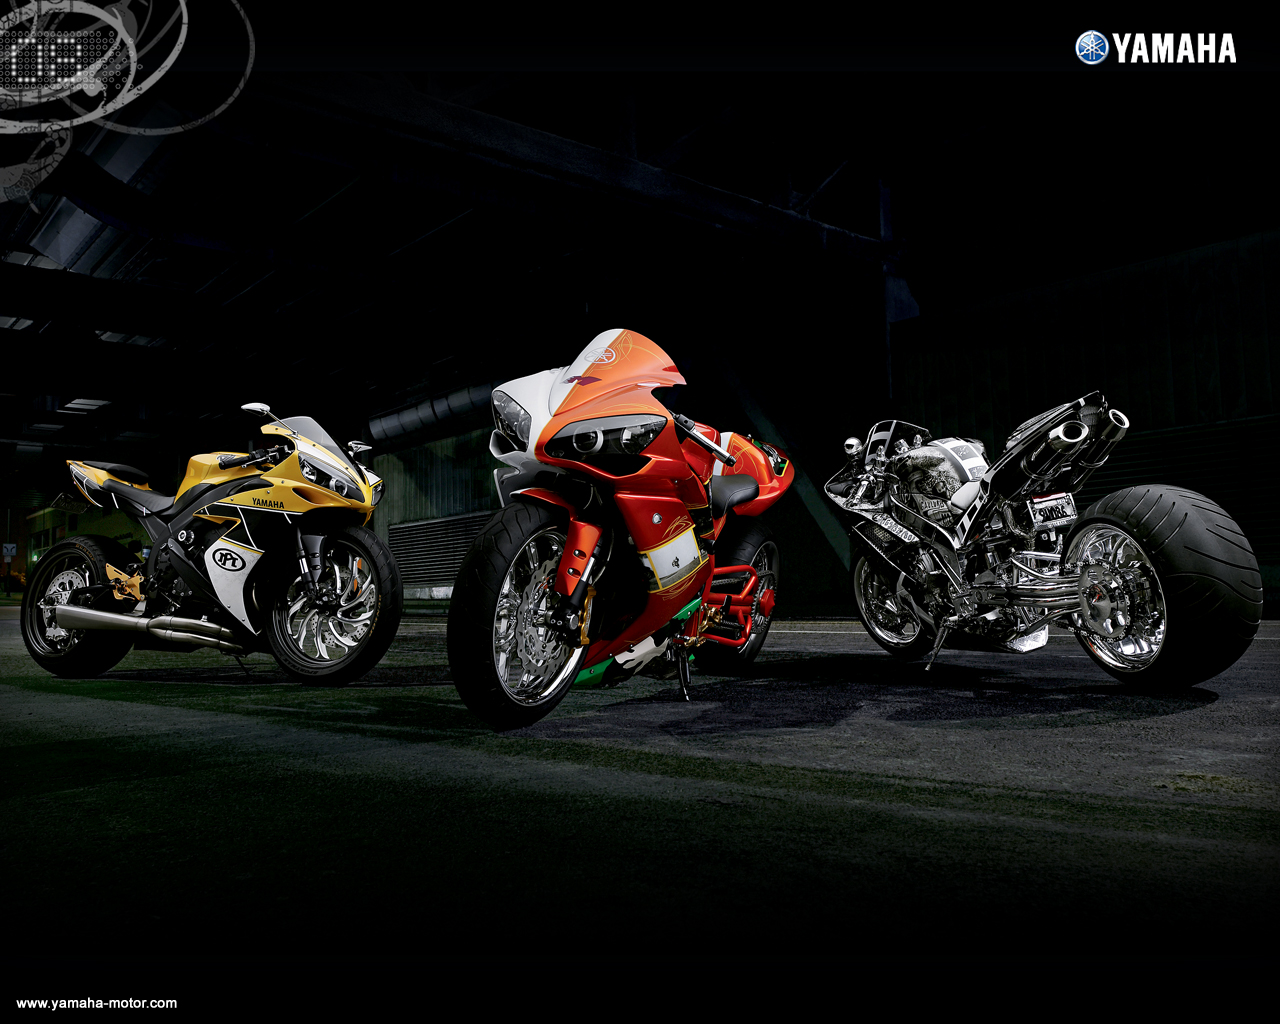 HD Yamaha Wallpaper Background Images For Download 1280x1024